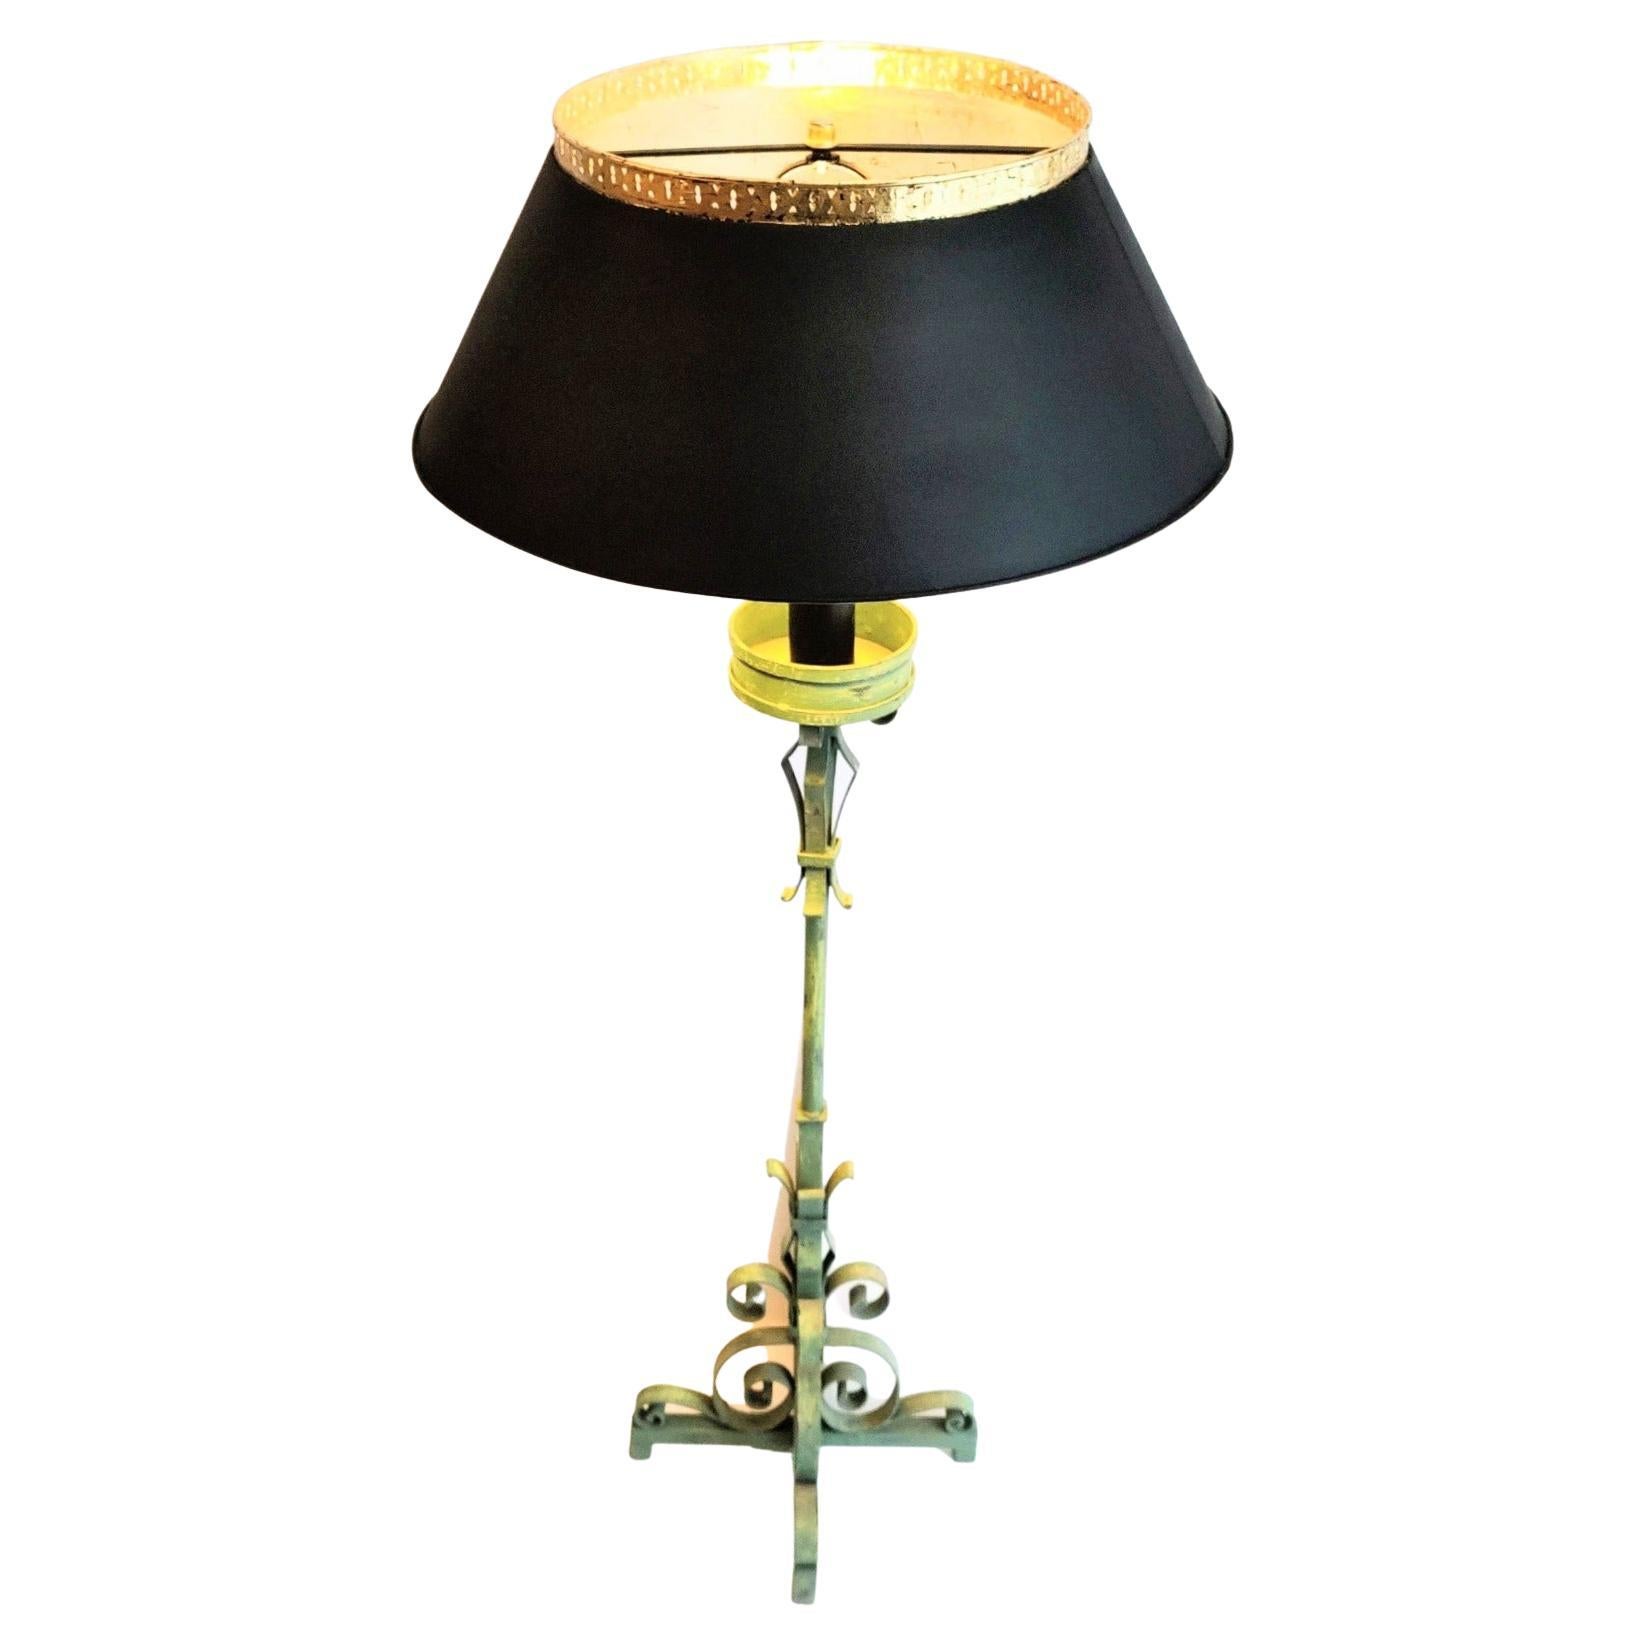 Original and Elegant Wrought Iron Lamp from the 1950s. in Green, Black and Gold.